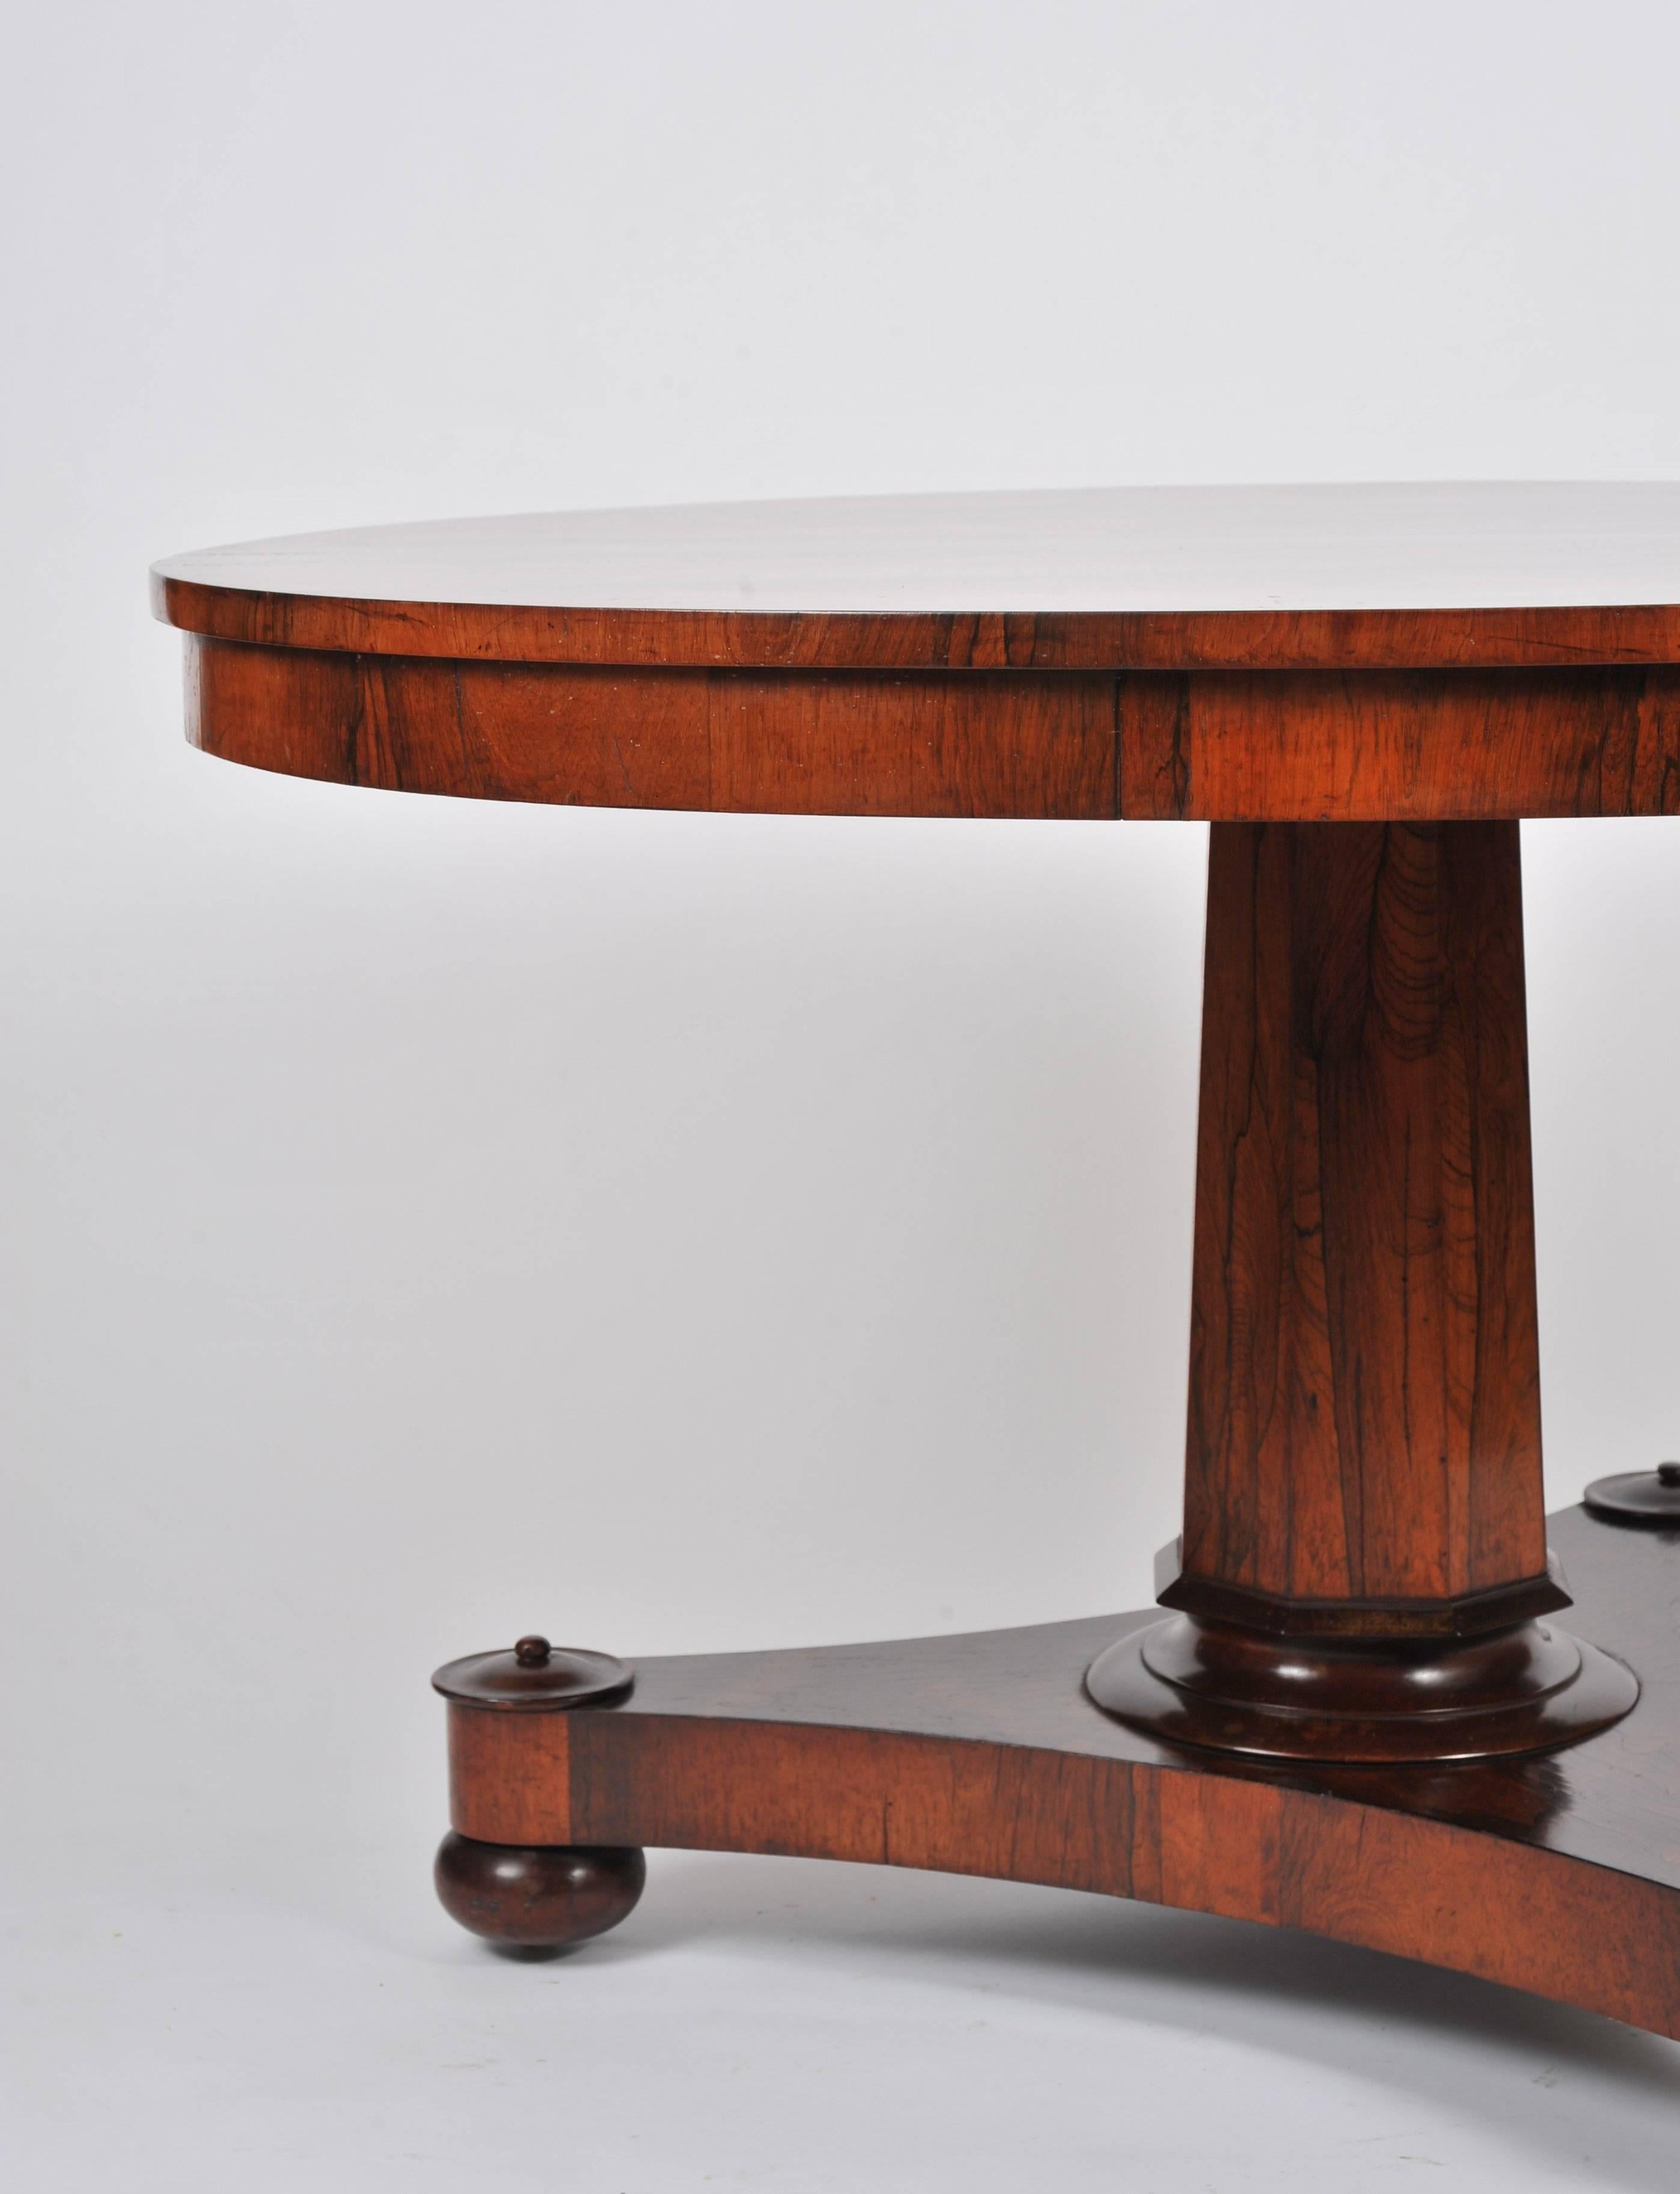 This gorgeous and outstanding quality rosewood circular tilt-top table features a stunning top supported on a central column with a tri form base. The table measures 47 in – 119.5 cm in diameter and 28 ¾ in – 73 cm in height. The table would make an